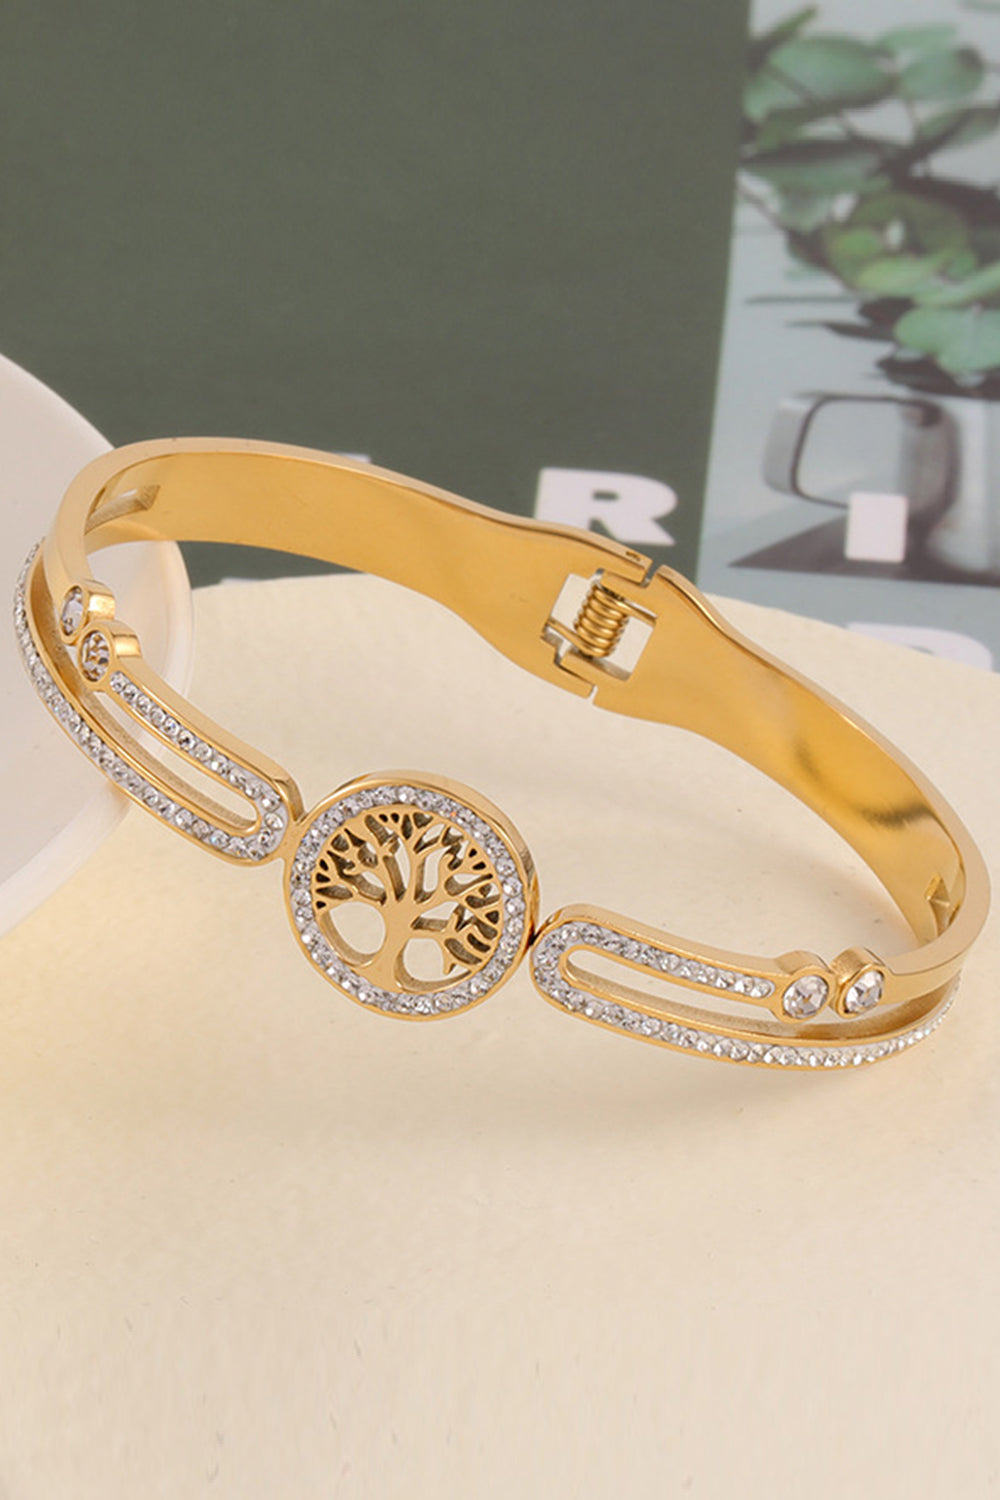 Fashion Stainless Steel Bracelet with Beading